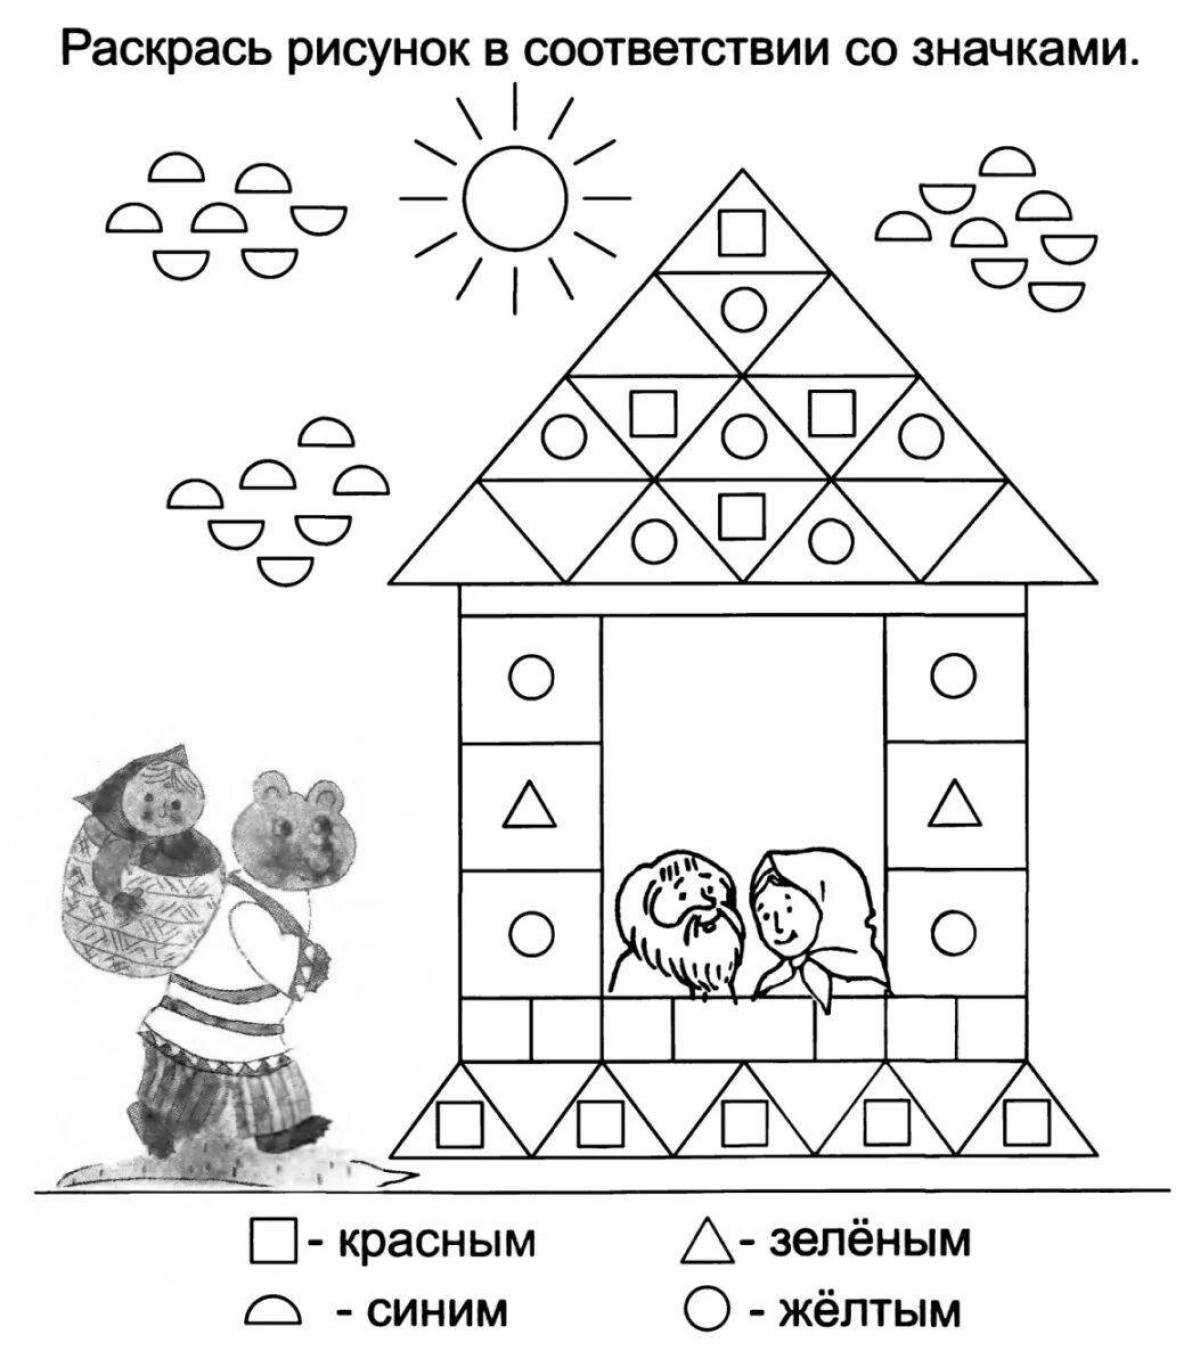 Relaxing logic coloring book for 3-4 year olds